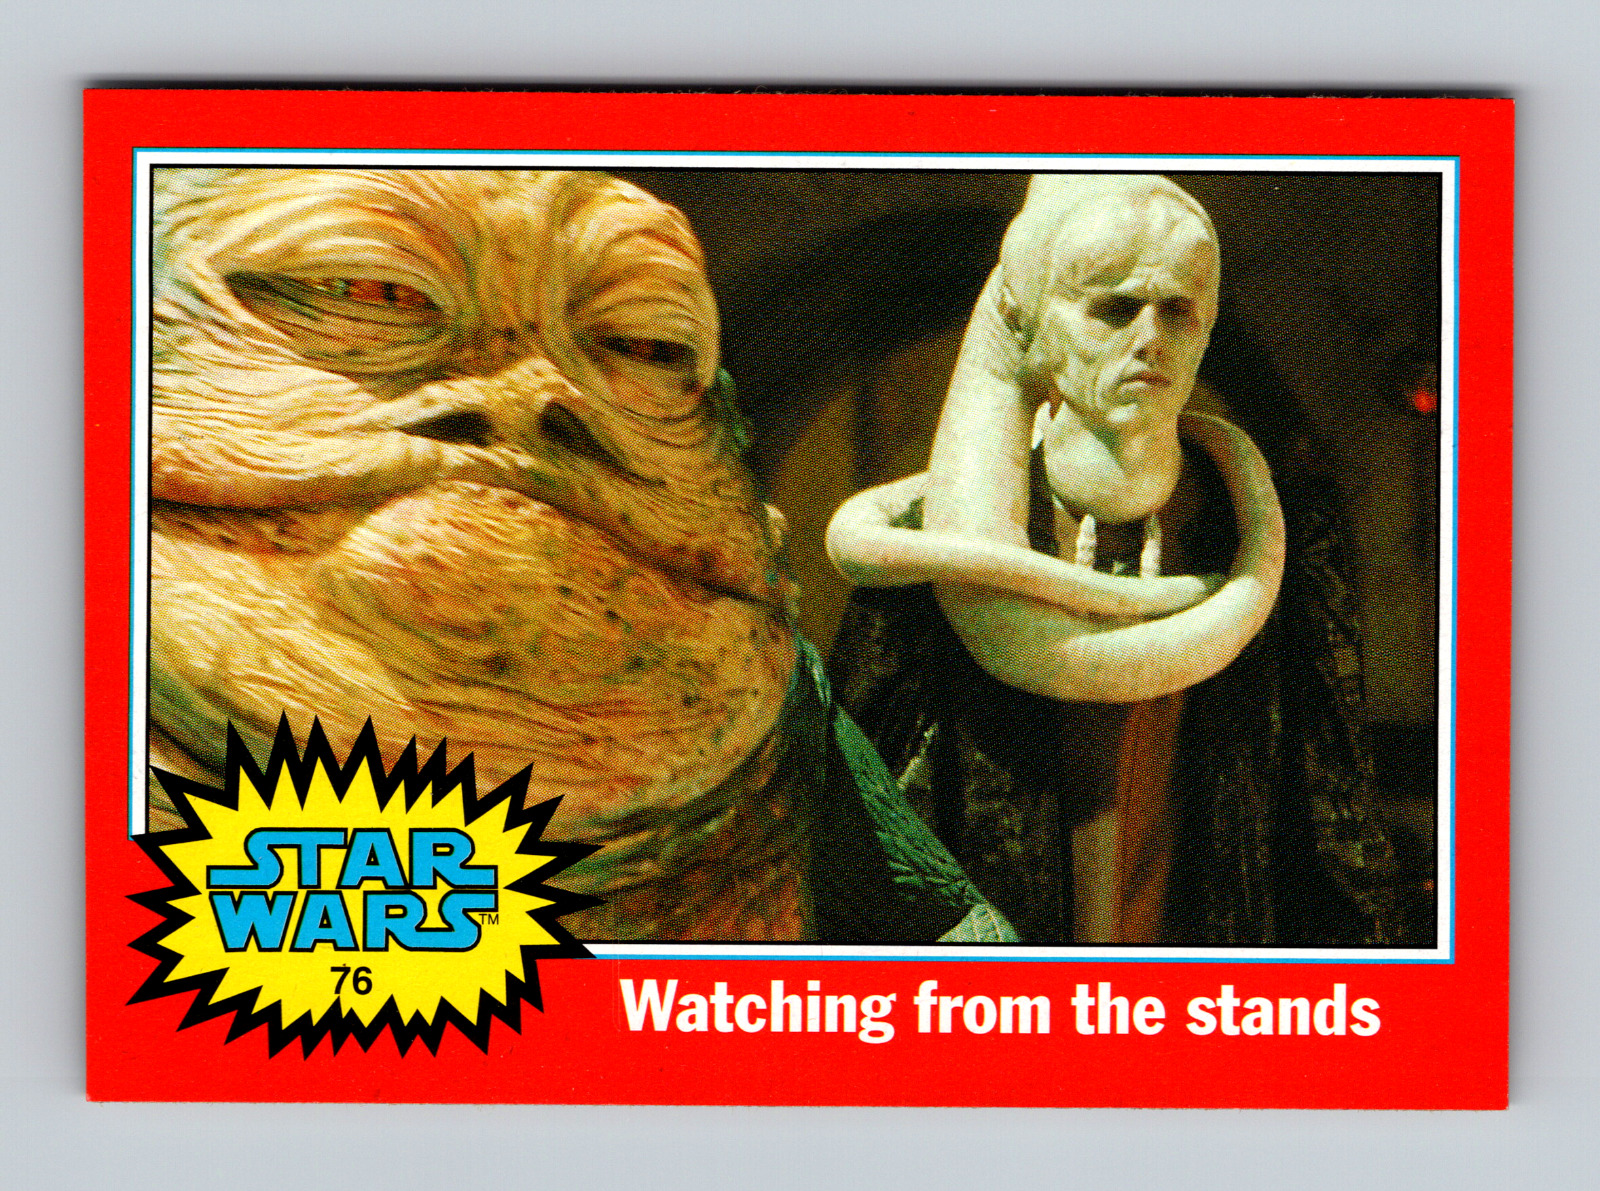 2004 Topps Star Wars Heritage #76 WATCHING FROM THE STANDS